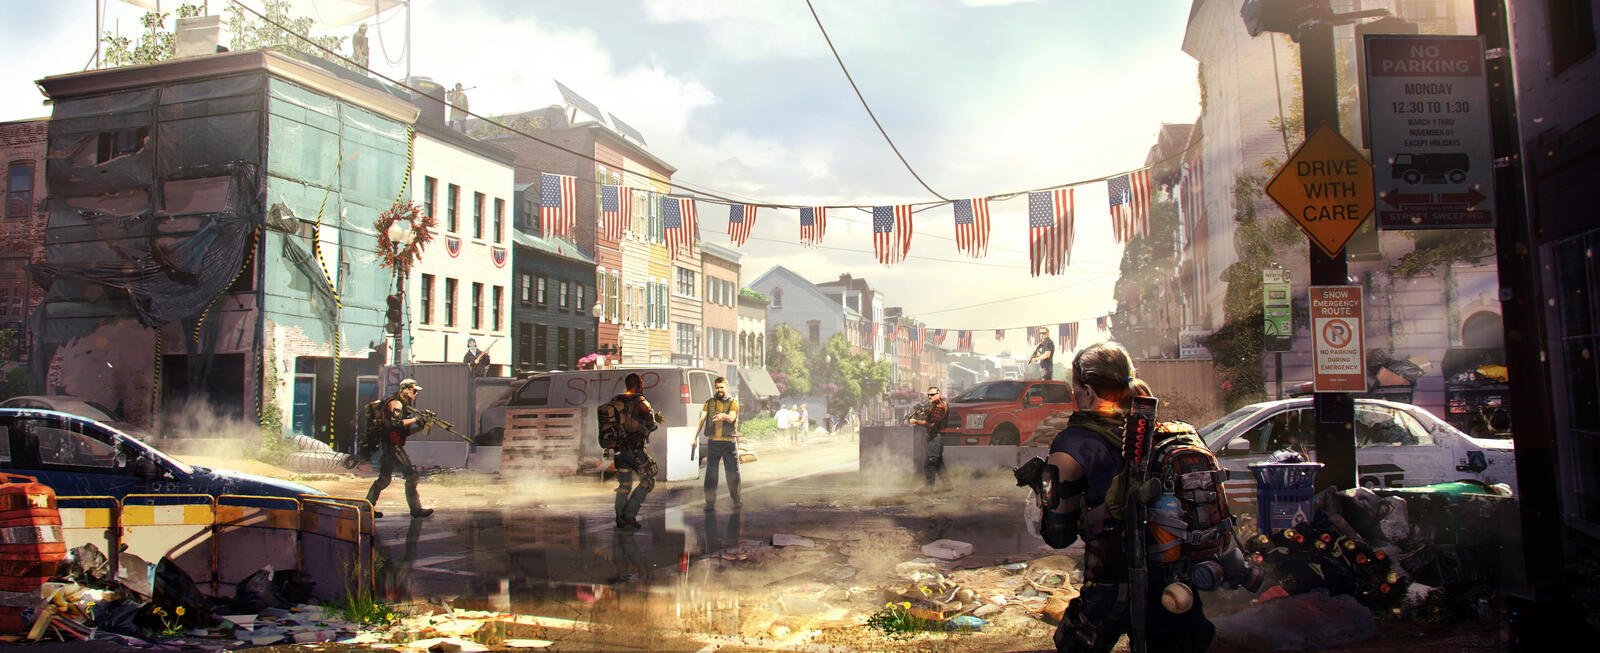 Wallpapers Tom Clancys The Division the 2018 Games games on the desktop